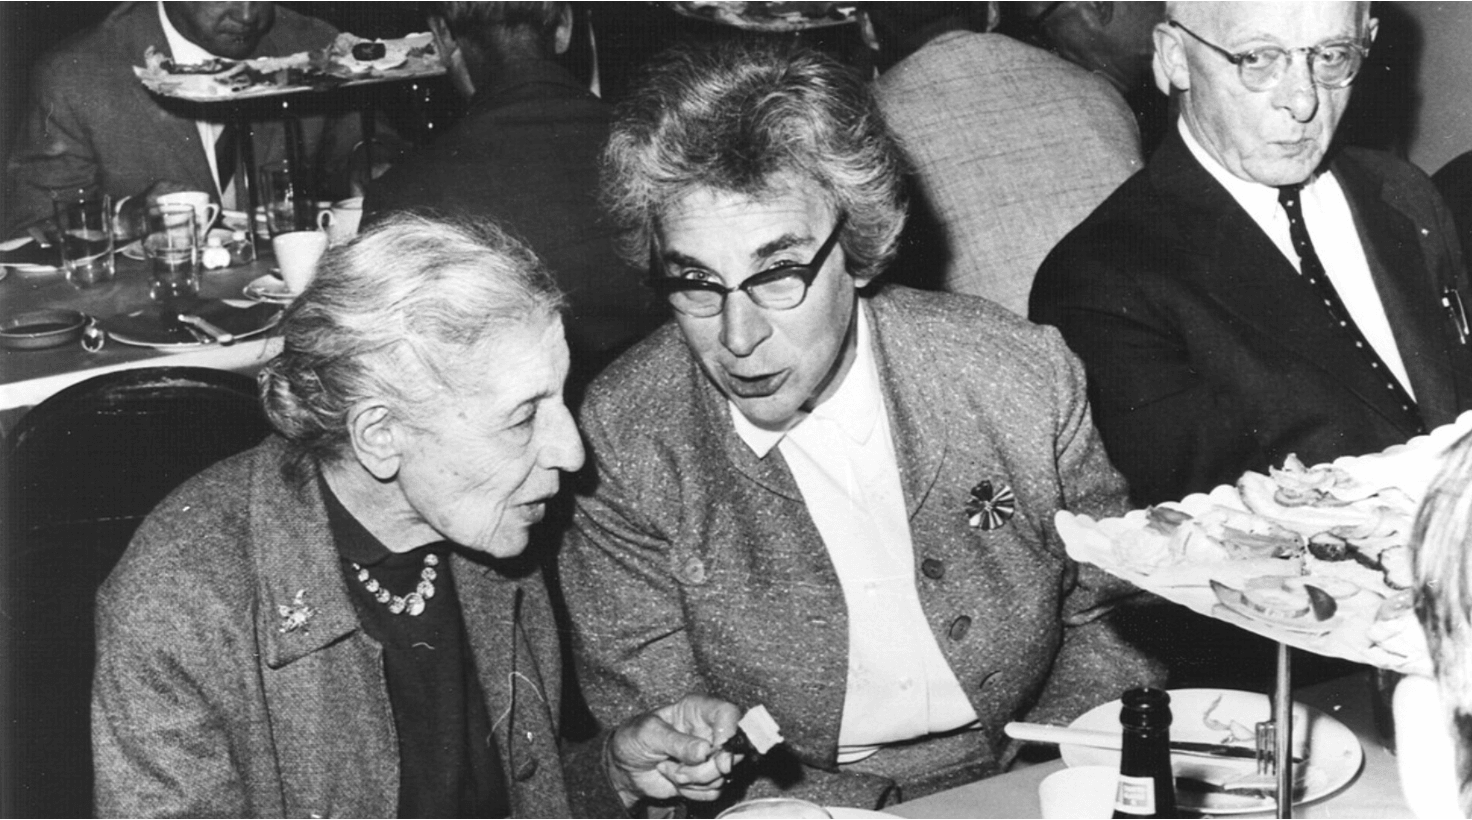 A black-and-white photo depicts two physicists, Lise Meitner and Hilde Levi, who are conversing at a table. Other people are visible in the background.